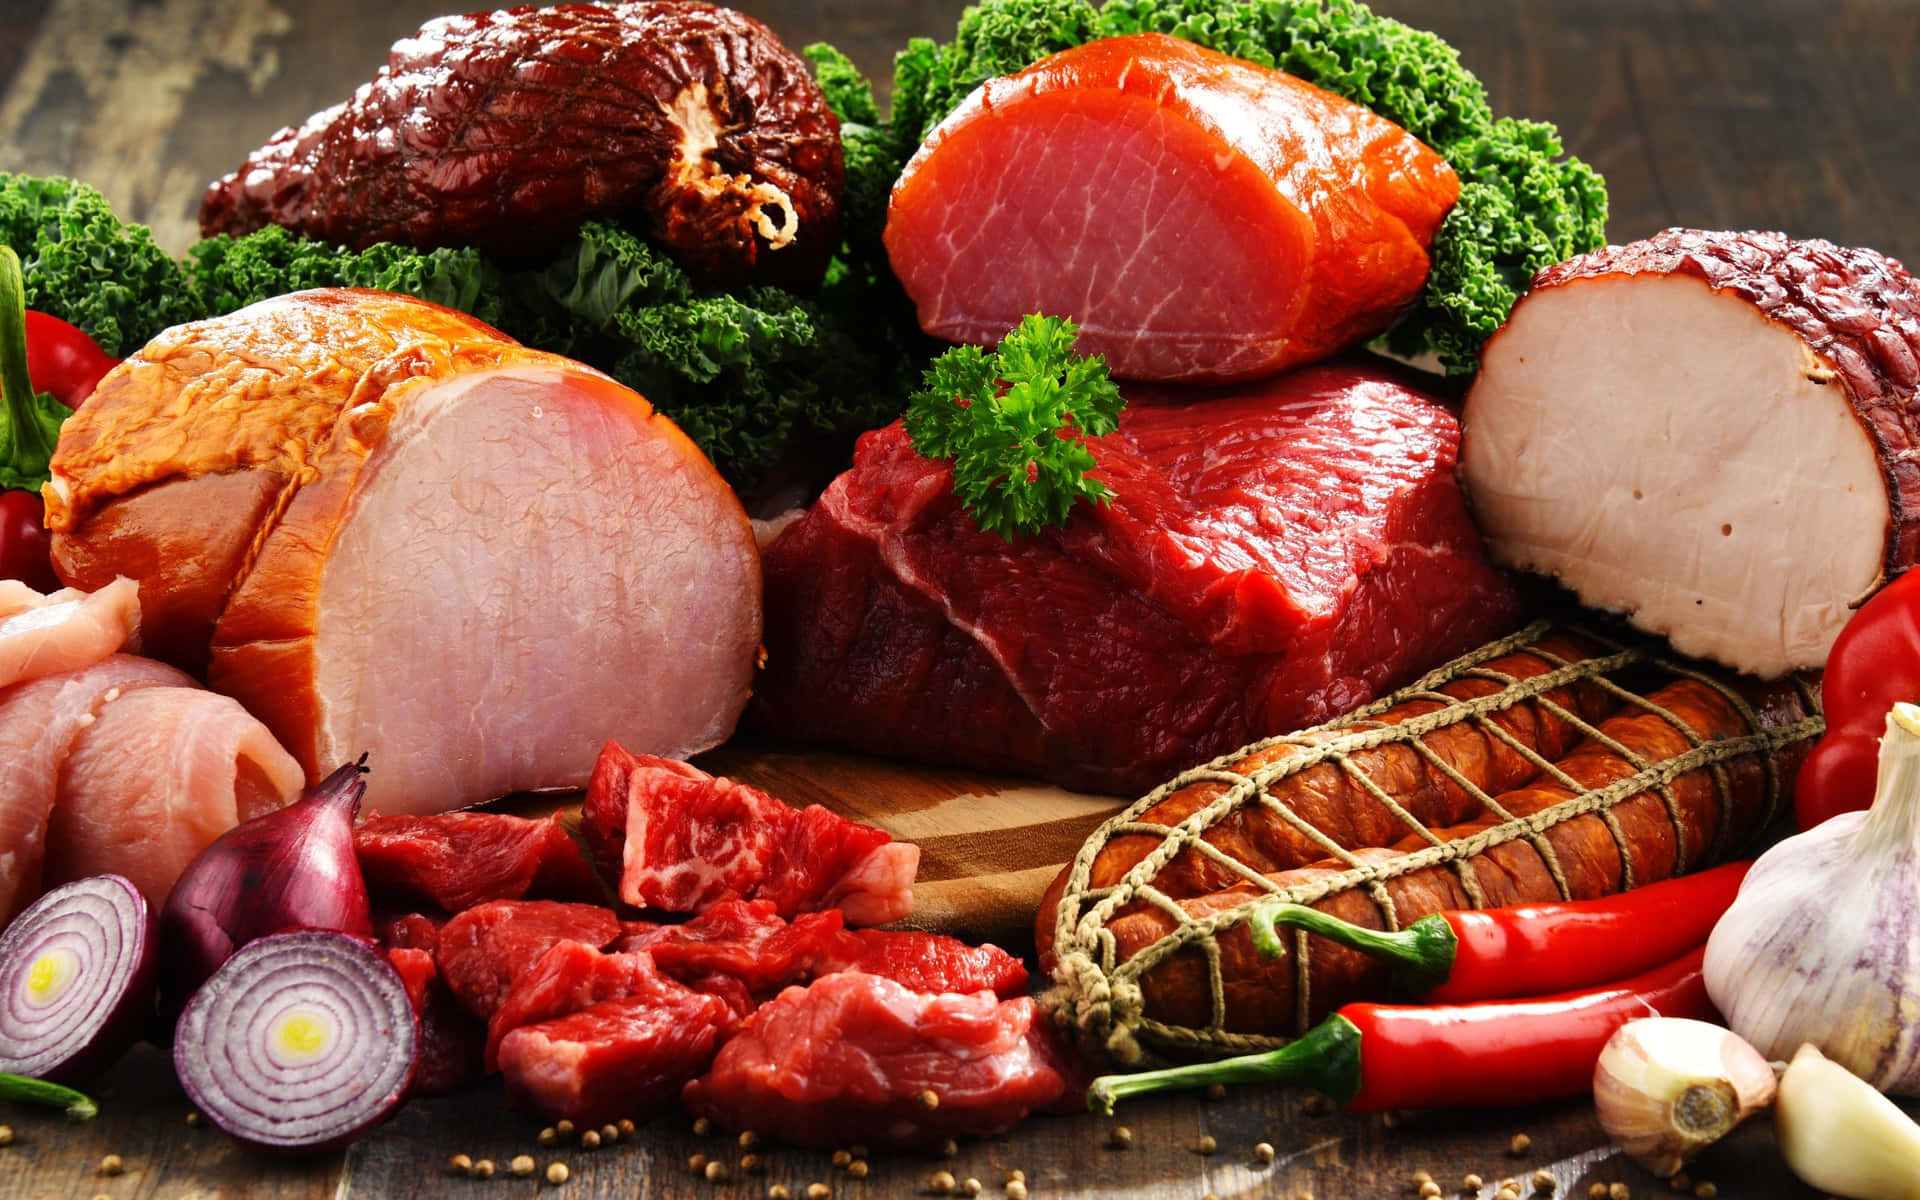 Perfectly Prepared Variety of Meats